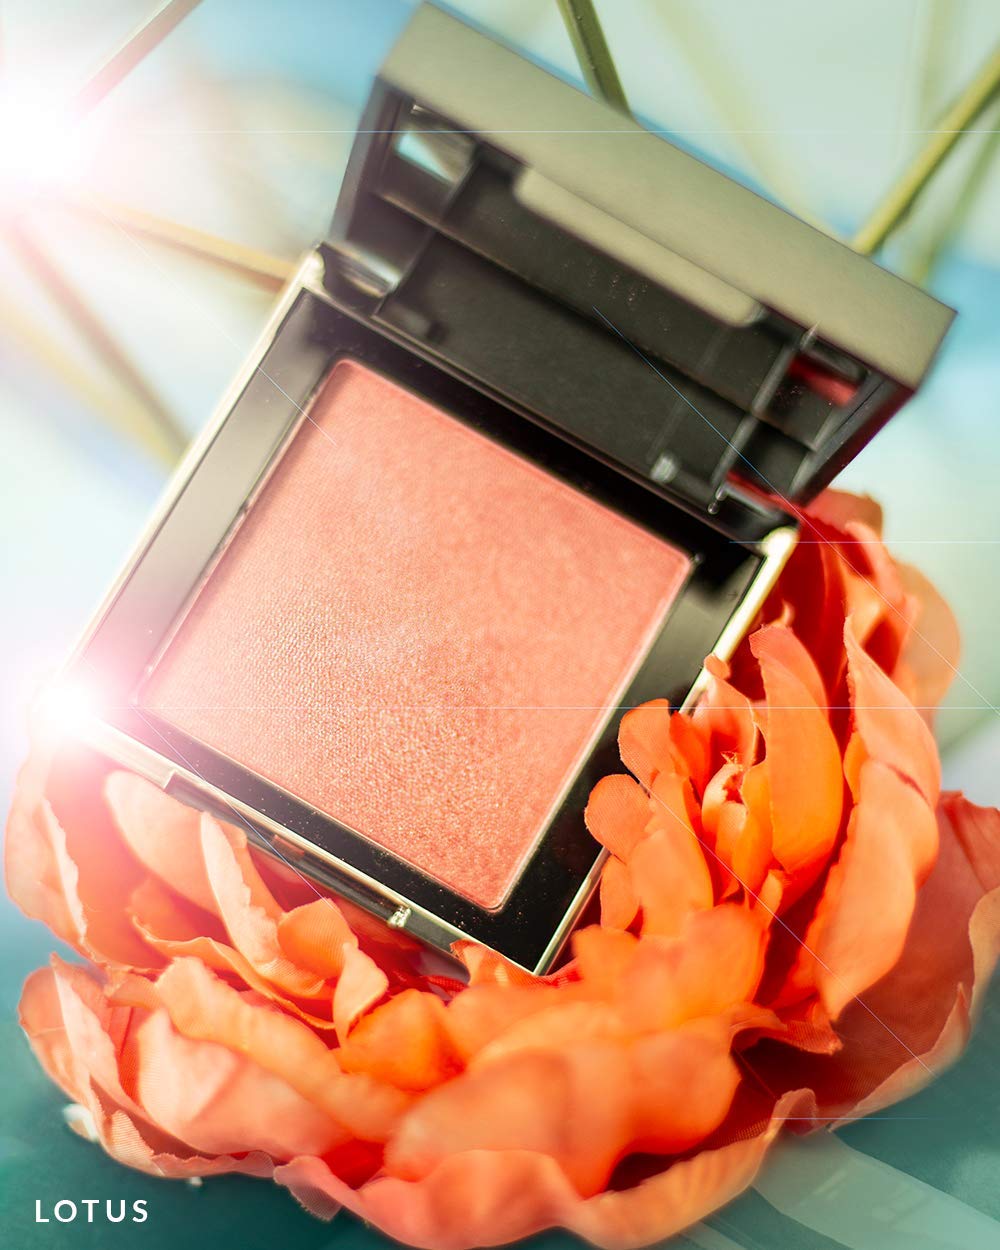 VASANTI Bloom Mineral Blush (Lotus - Golden Pink) - High Pigmented Cruelty Free Soft Highly Blendable Face Cheeks Blush Powder